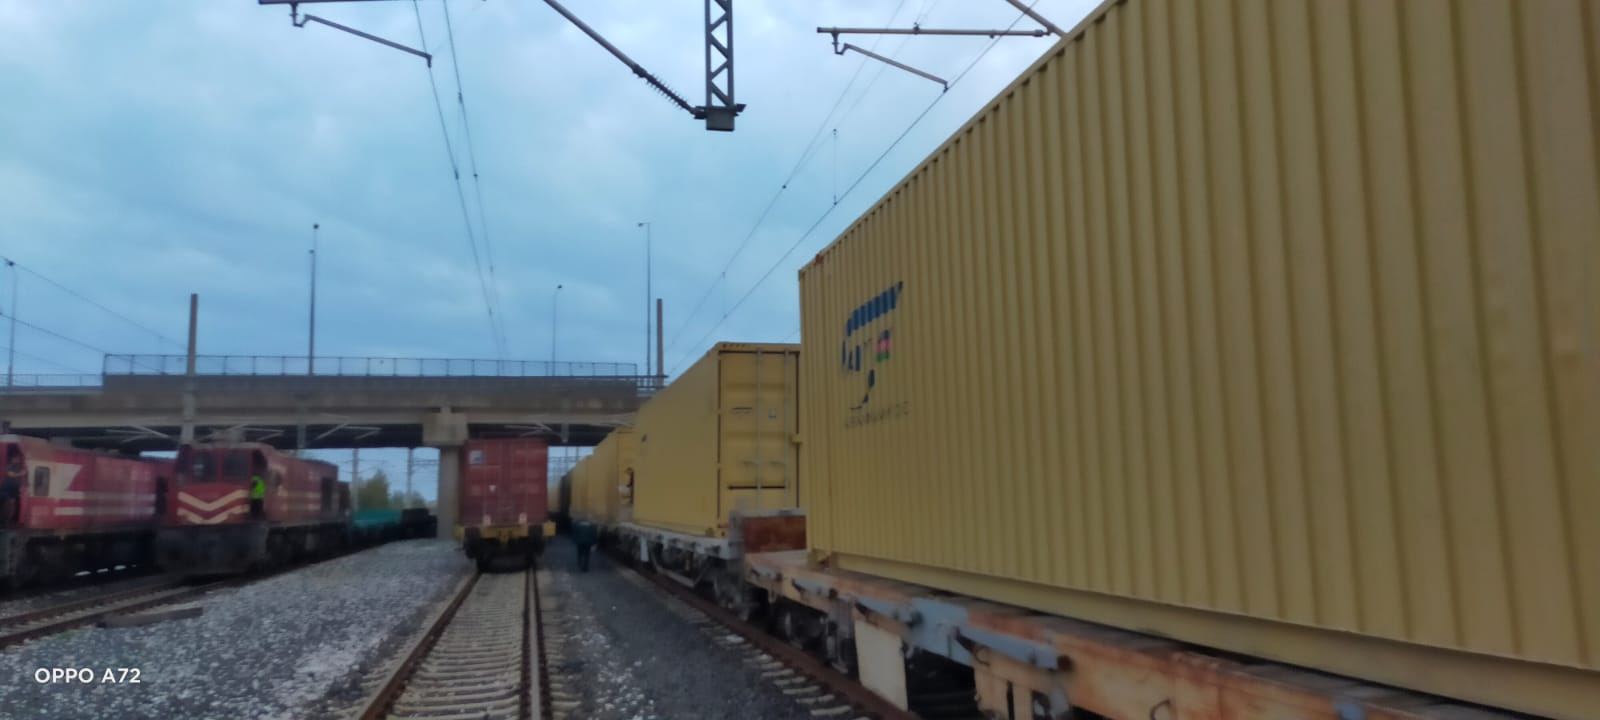 First container train on its way to Azerbaijan's Karabakh (PHOTO/VIDEO)